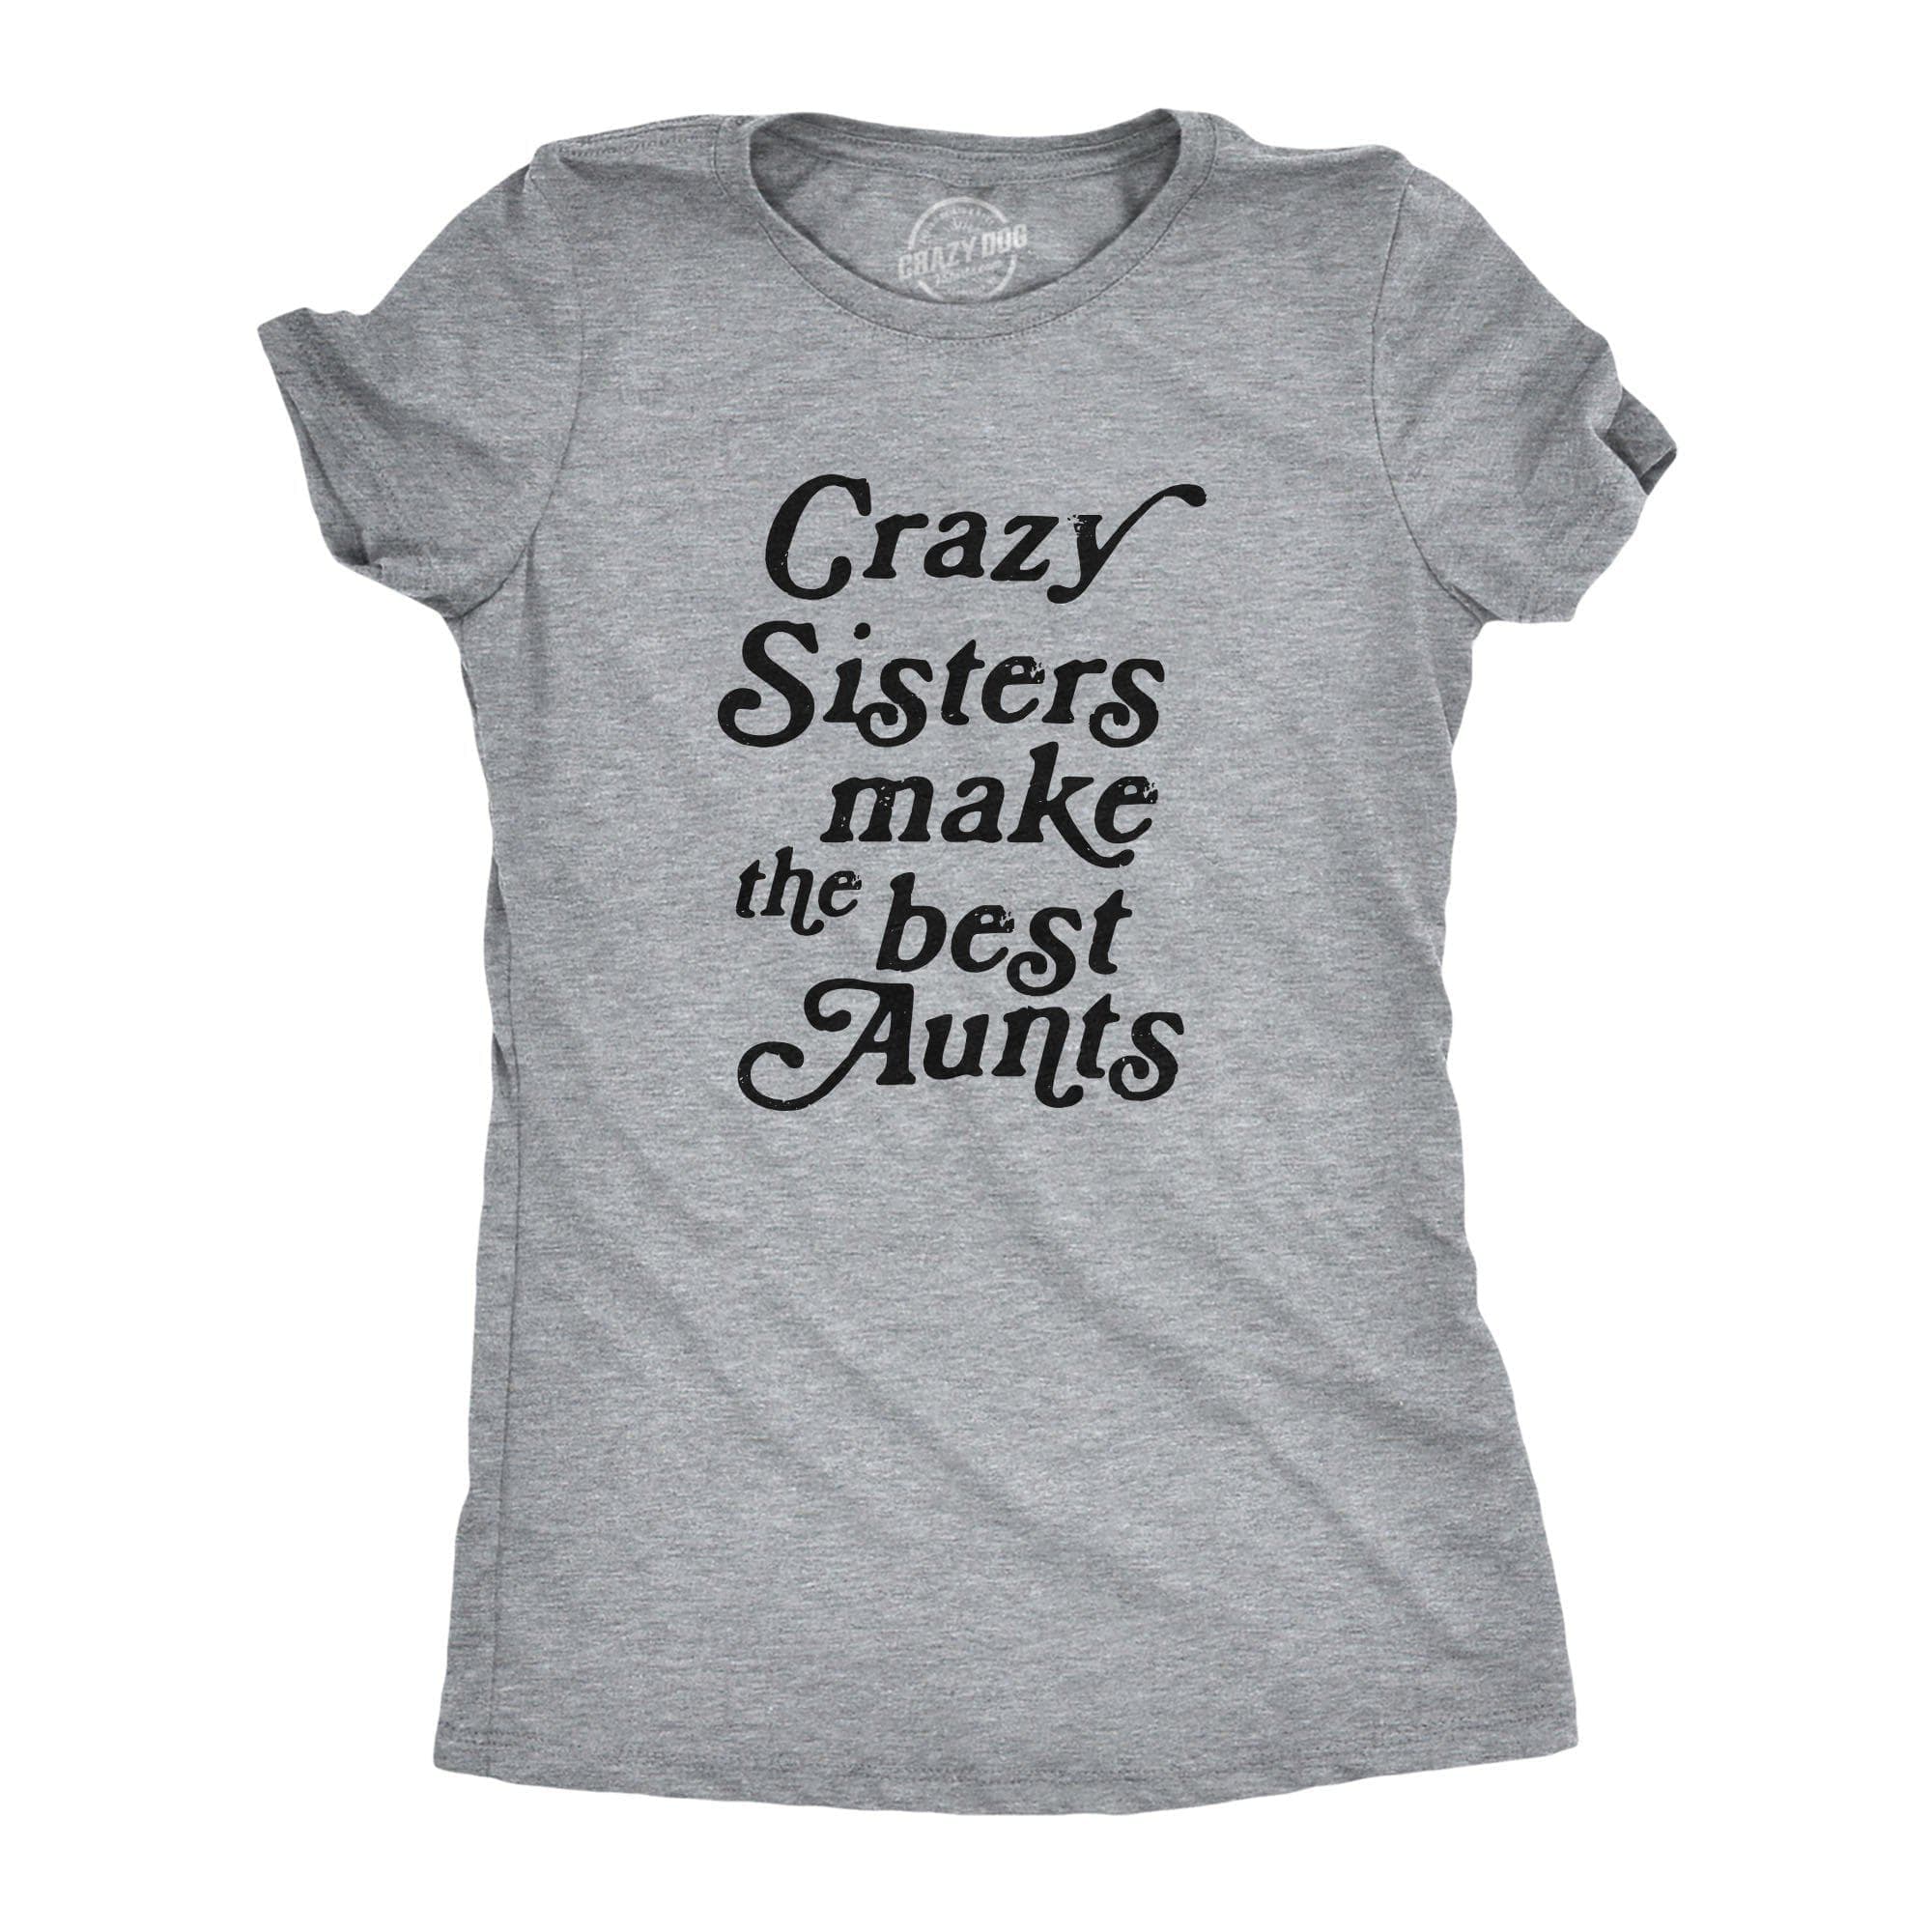 Crazy Sisters Make The Best Aunts Women's Tshirt - Crazy Dog T-Shirts